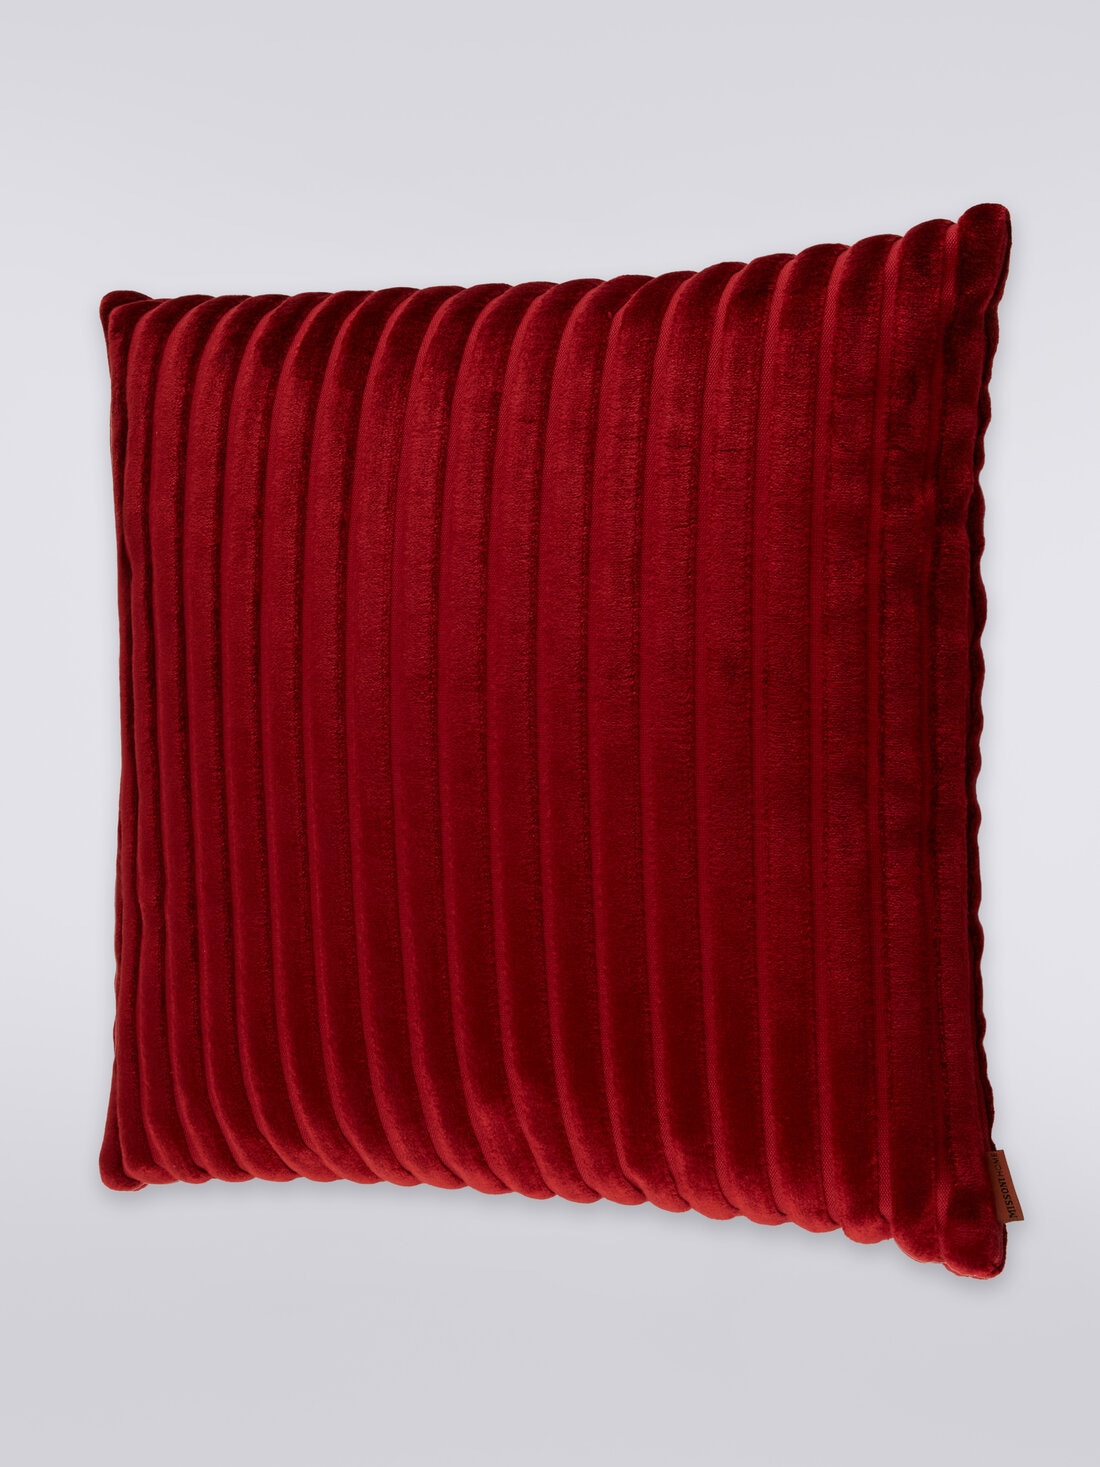 Coomba Coussin 40X40, Rouge  - 8033050653744 - 1